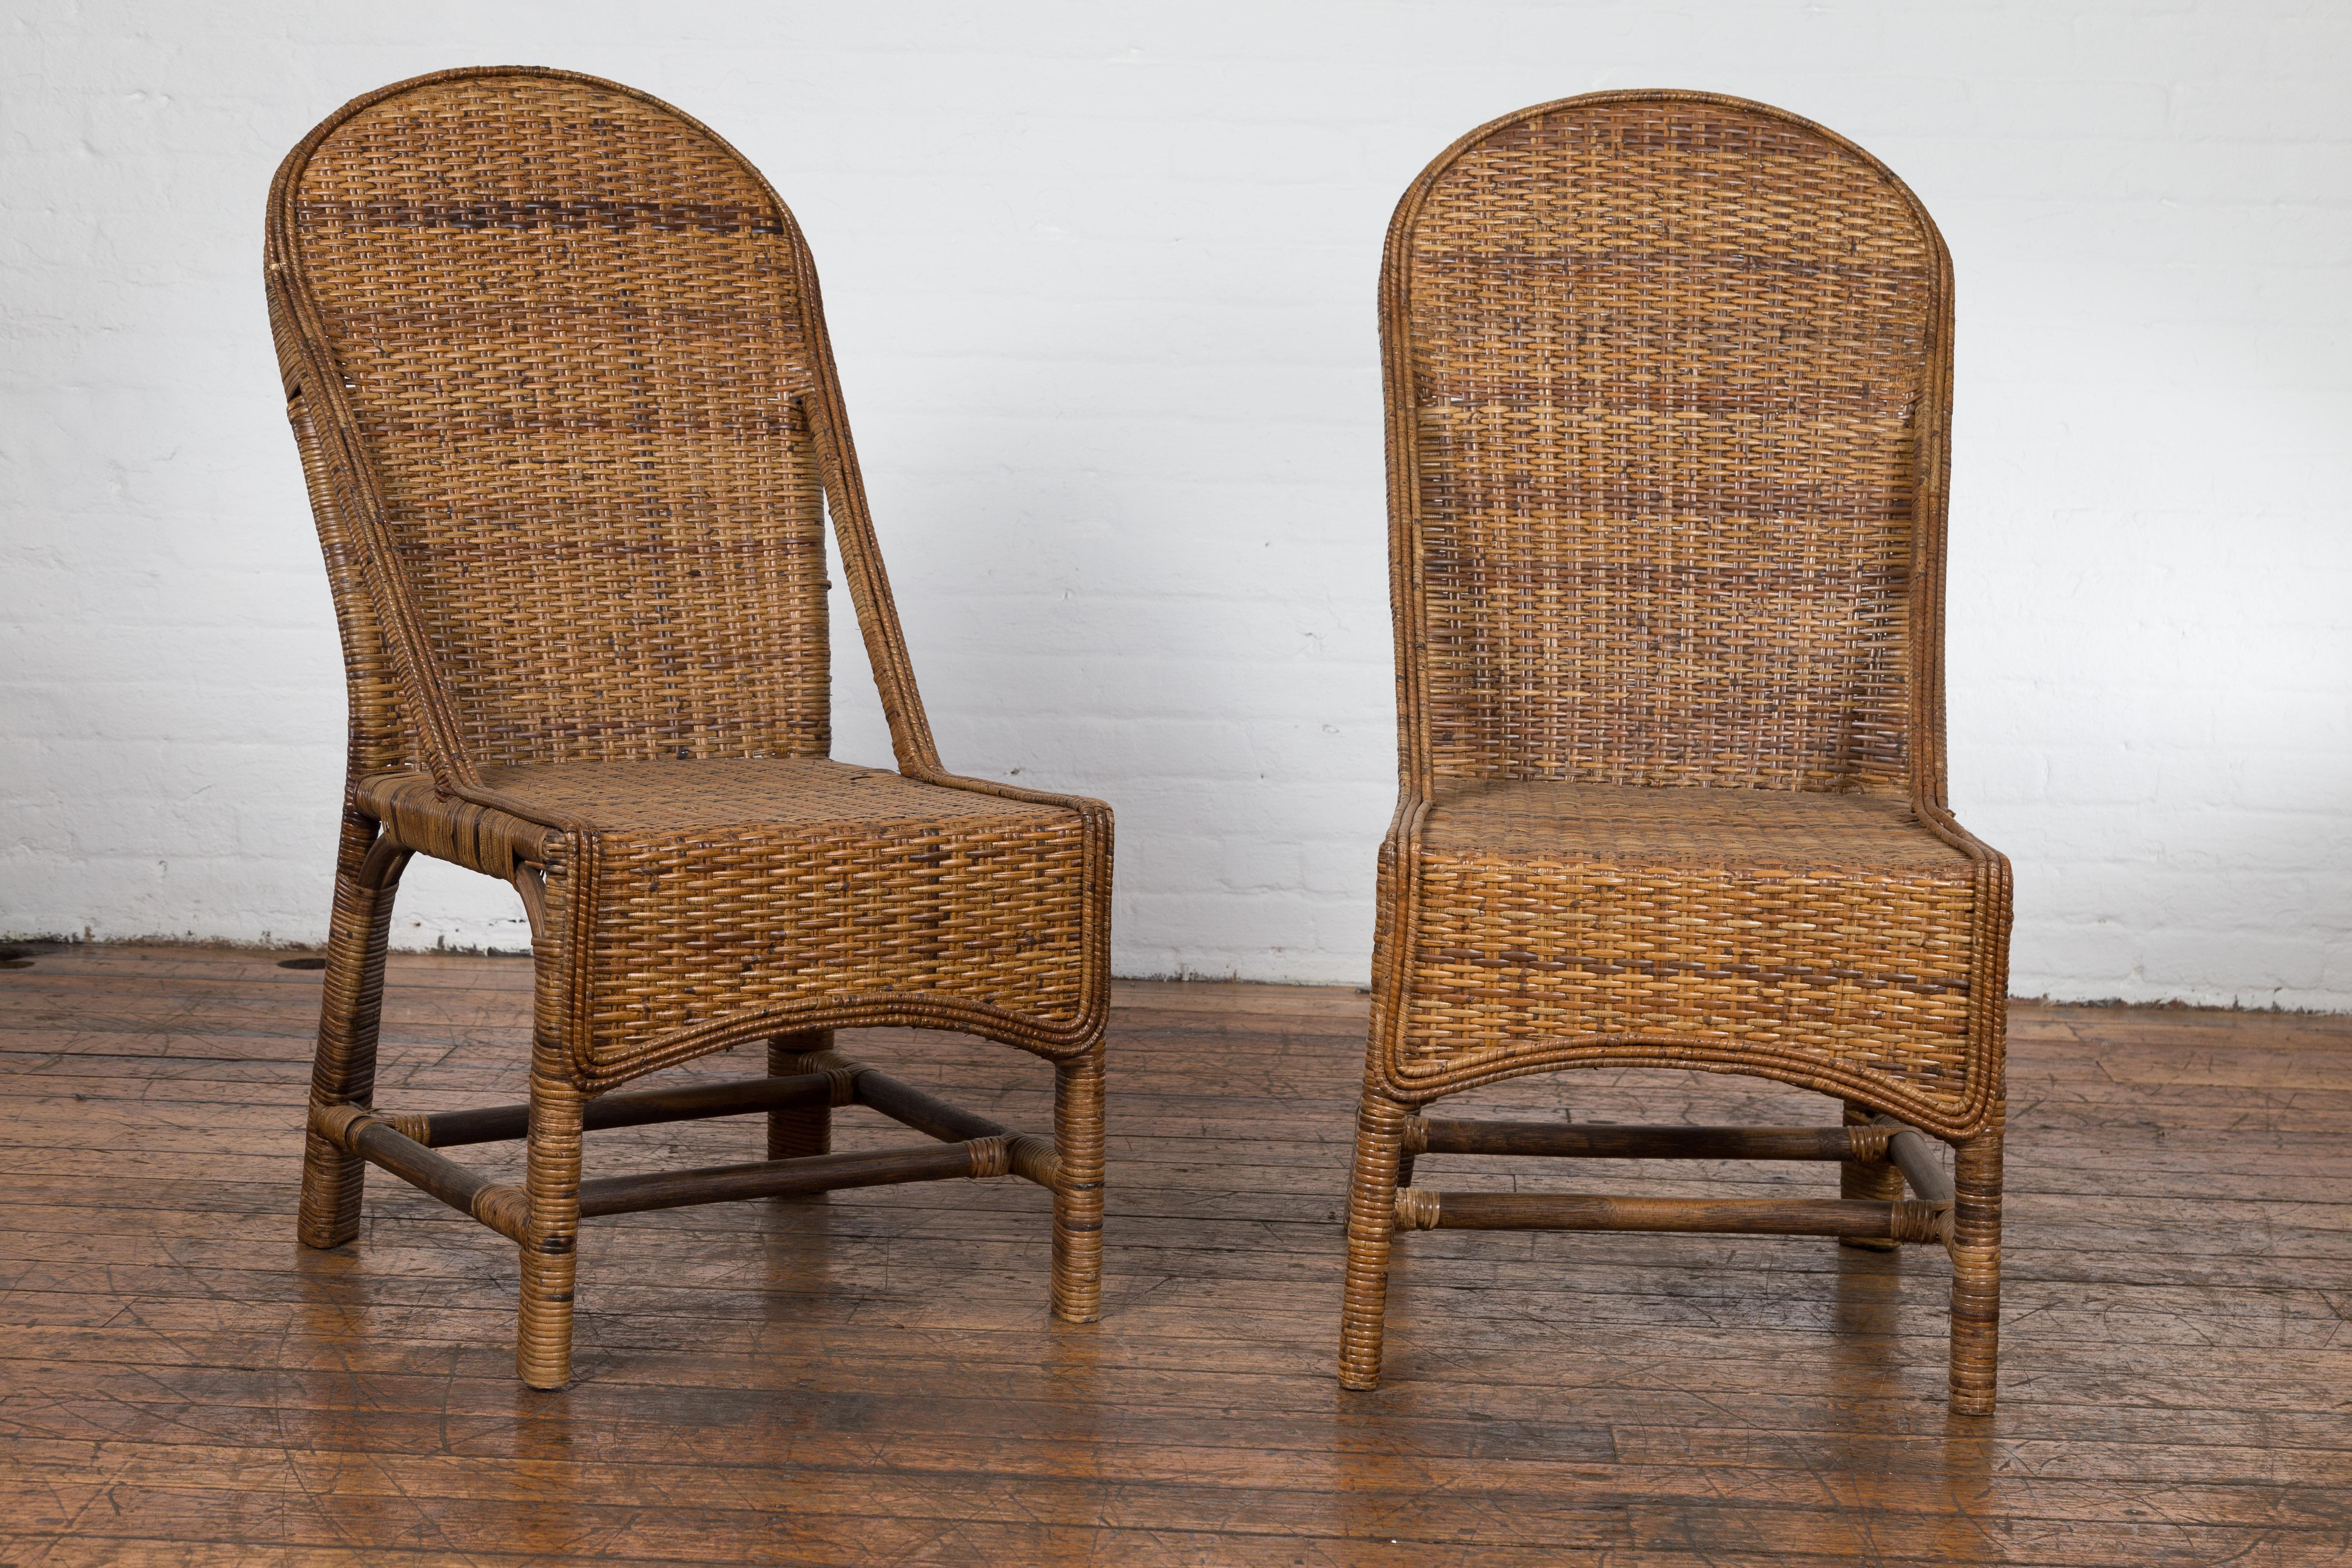 A vintage pair of Country style Burmese hand woven rattan chairs from the mid 20th century, with arching backs and double H-Form cross stretchers. Created in Burma (nowadays called Myanmar) during the midcentury period, this pair of rattan chairs